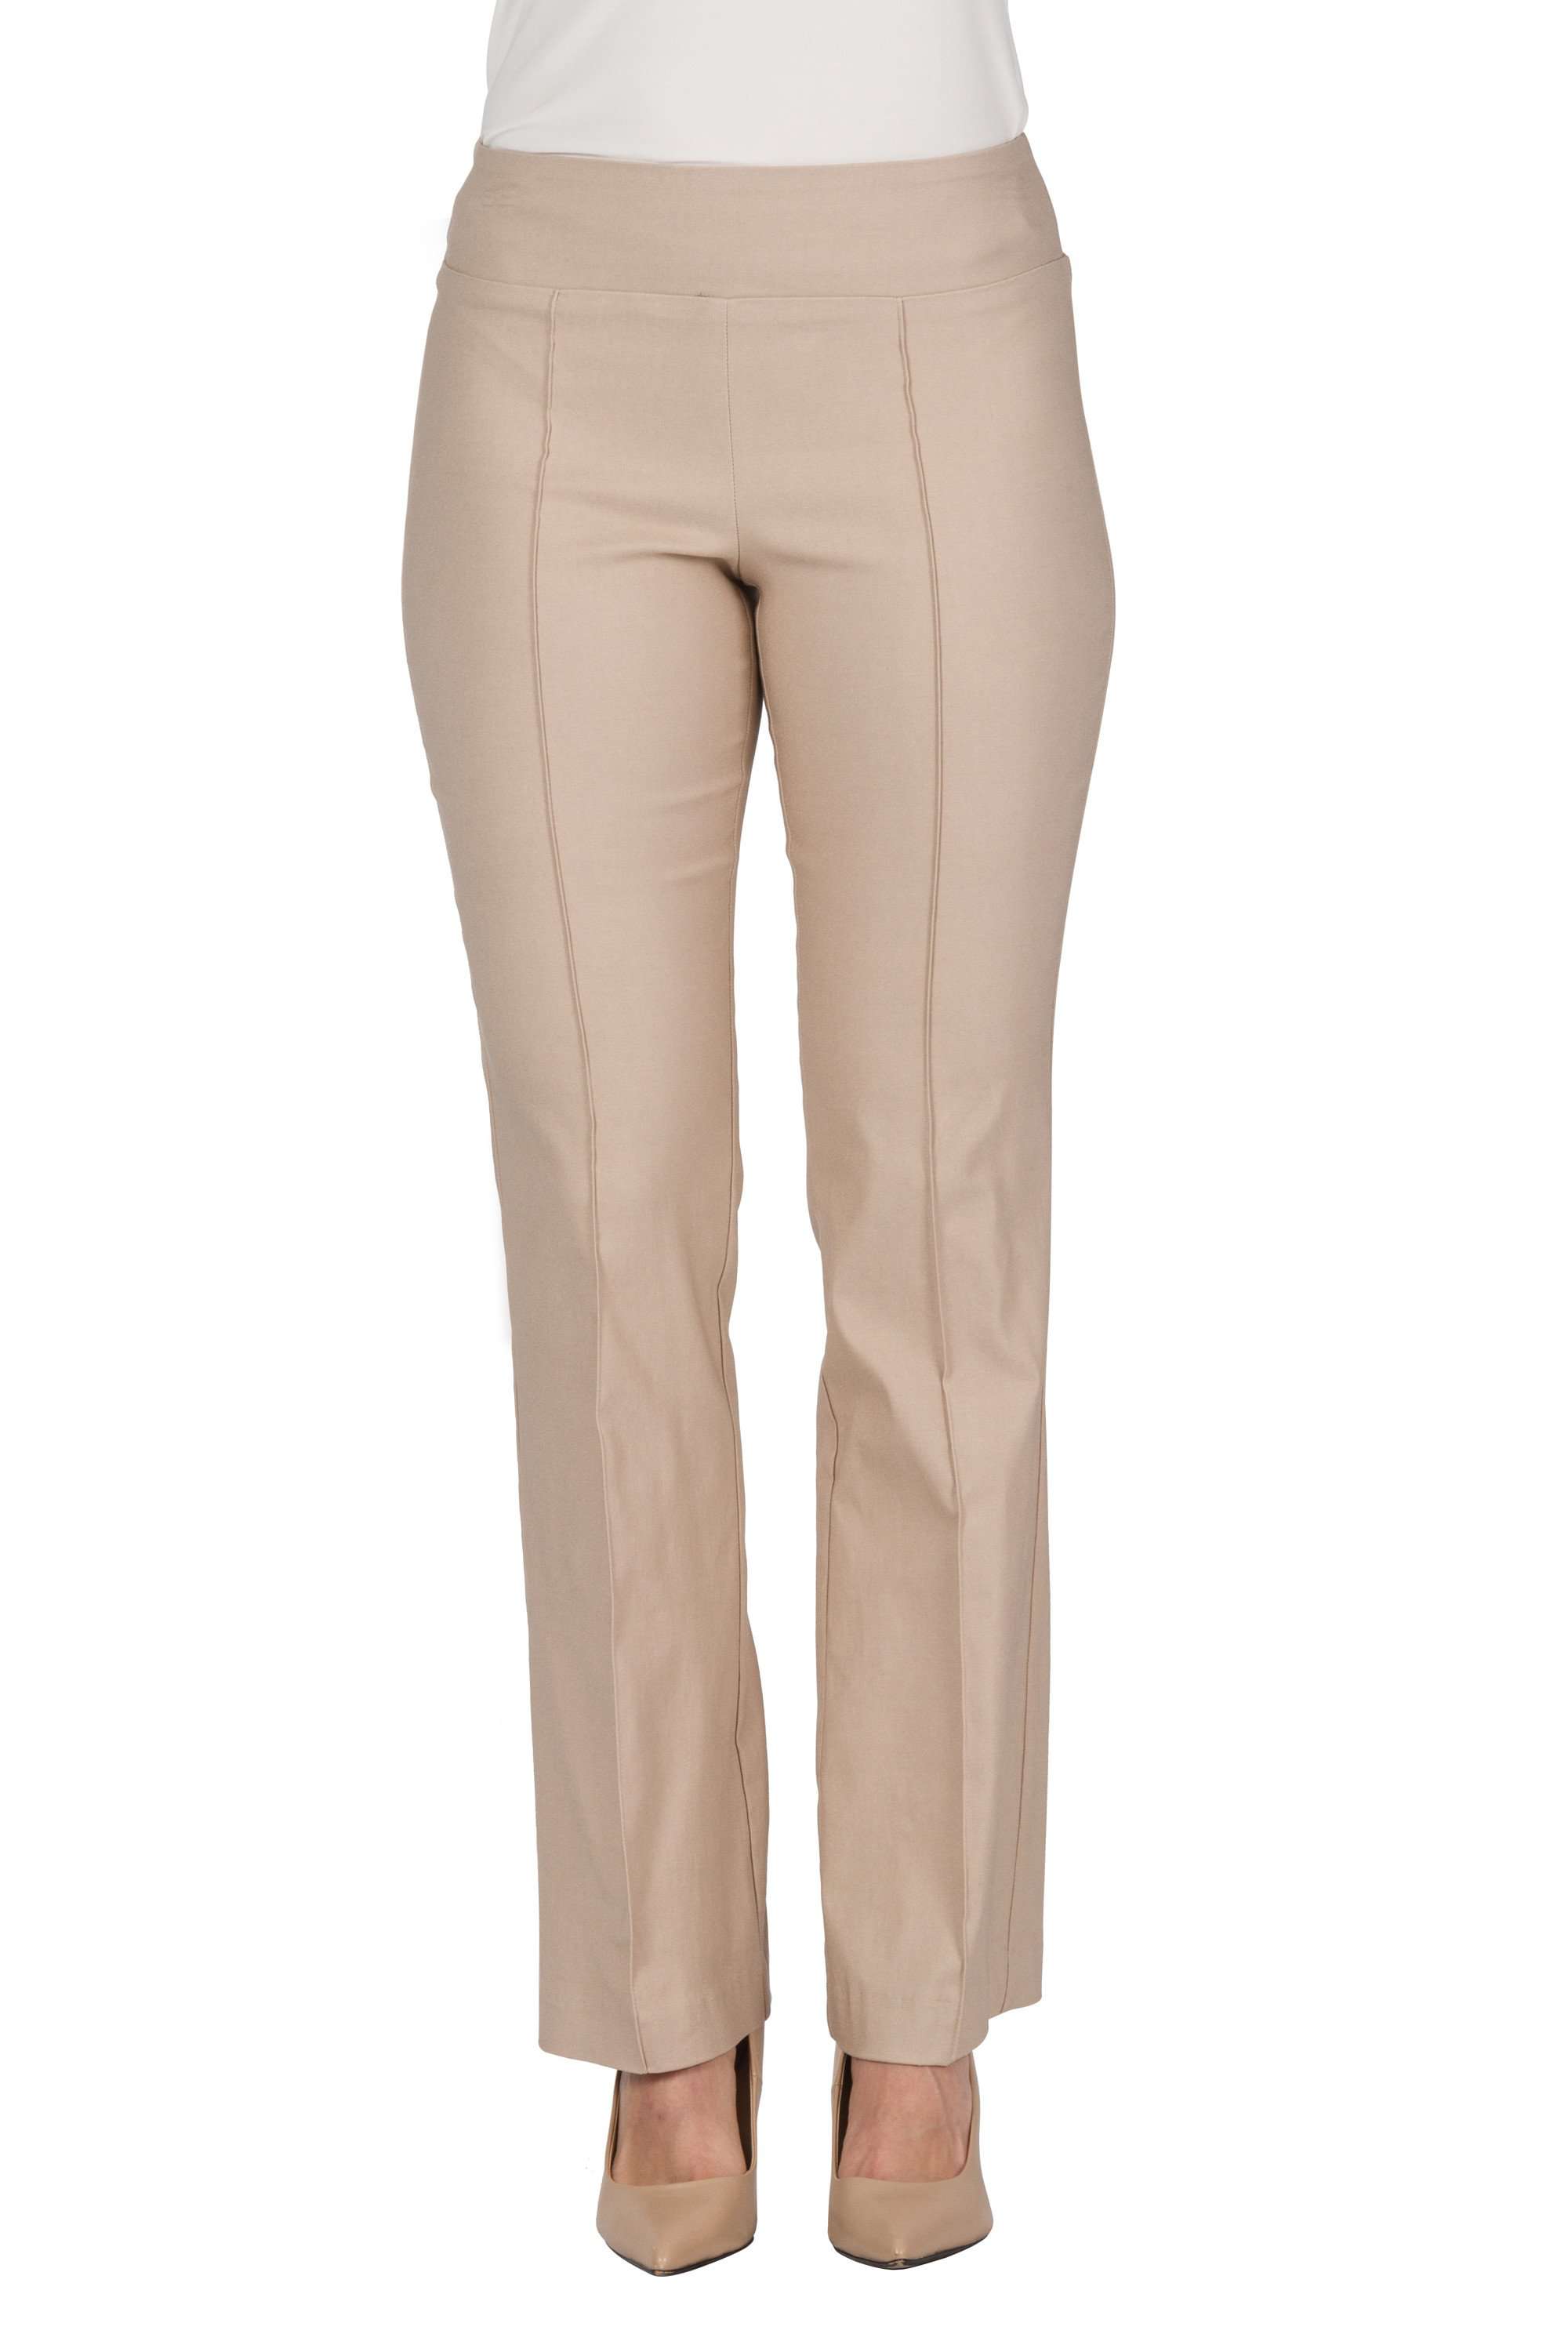 Women's Pants Tan "Miracle Fit" Stretch Pant - Made in Canada - Yvonne Marie - Yvonne Marie